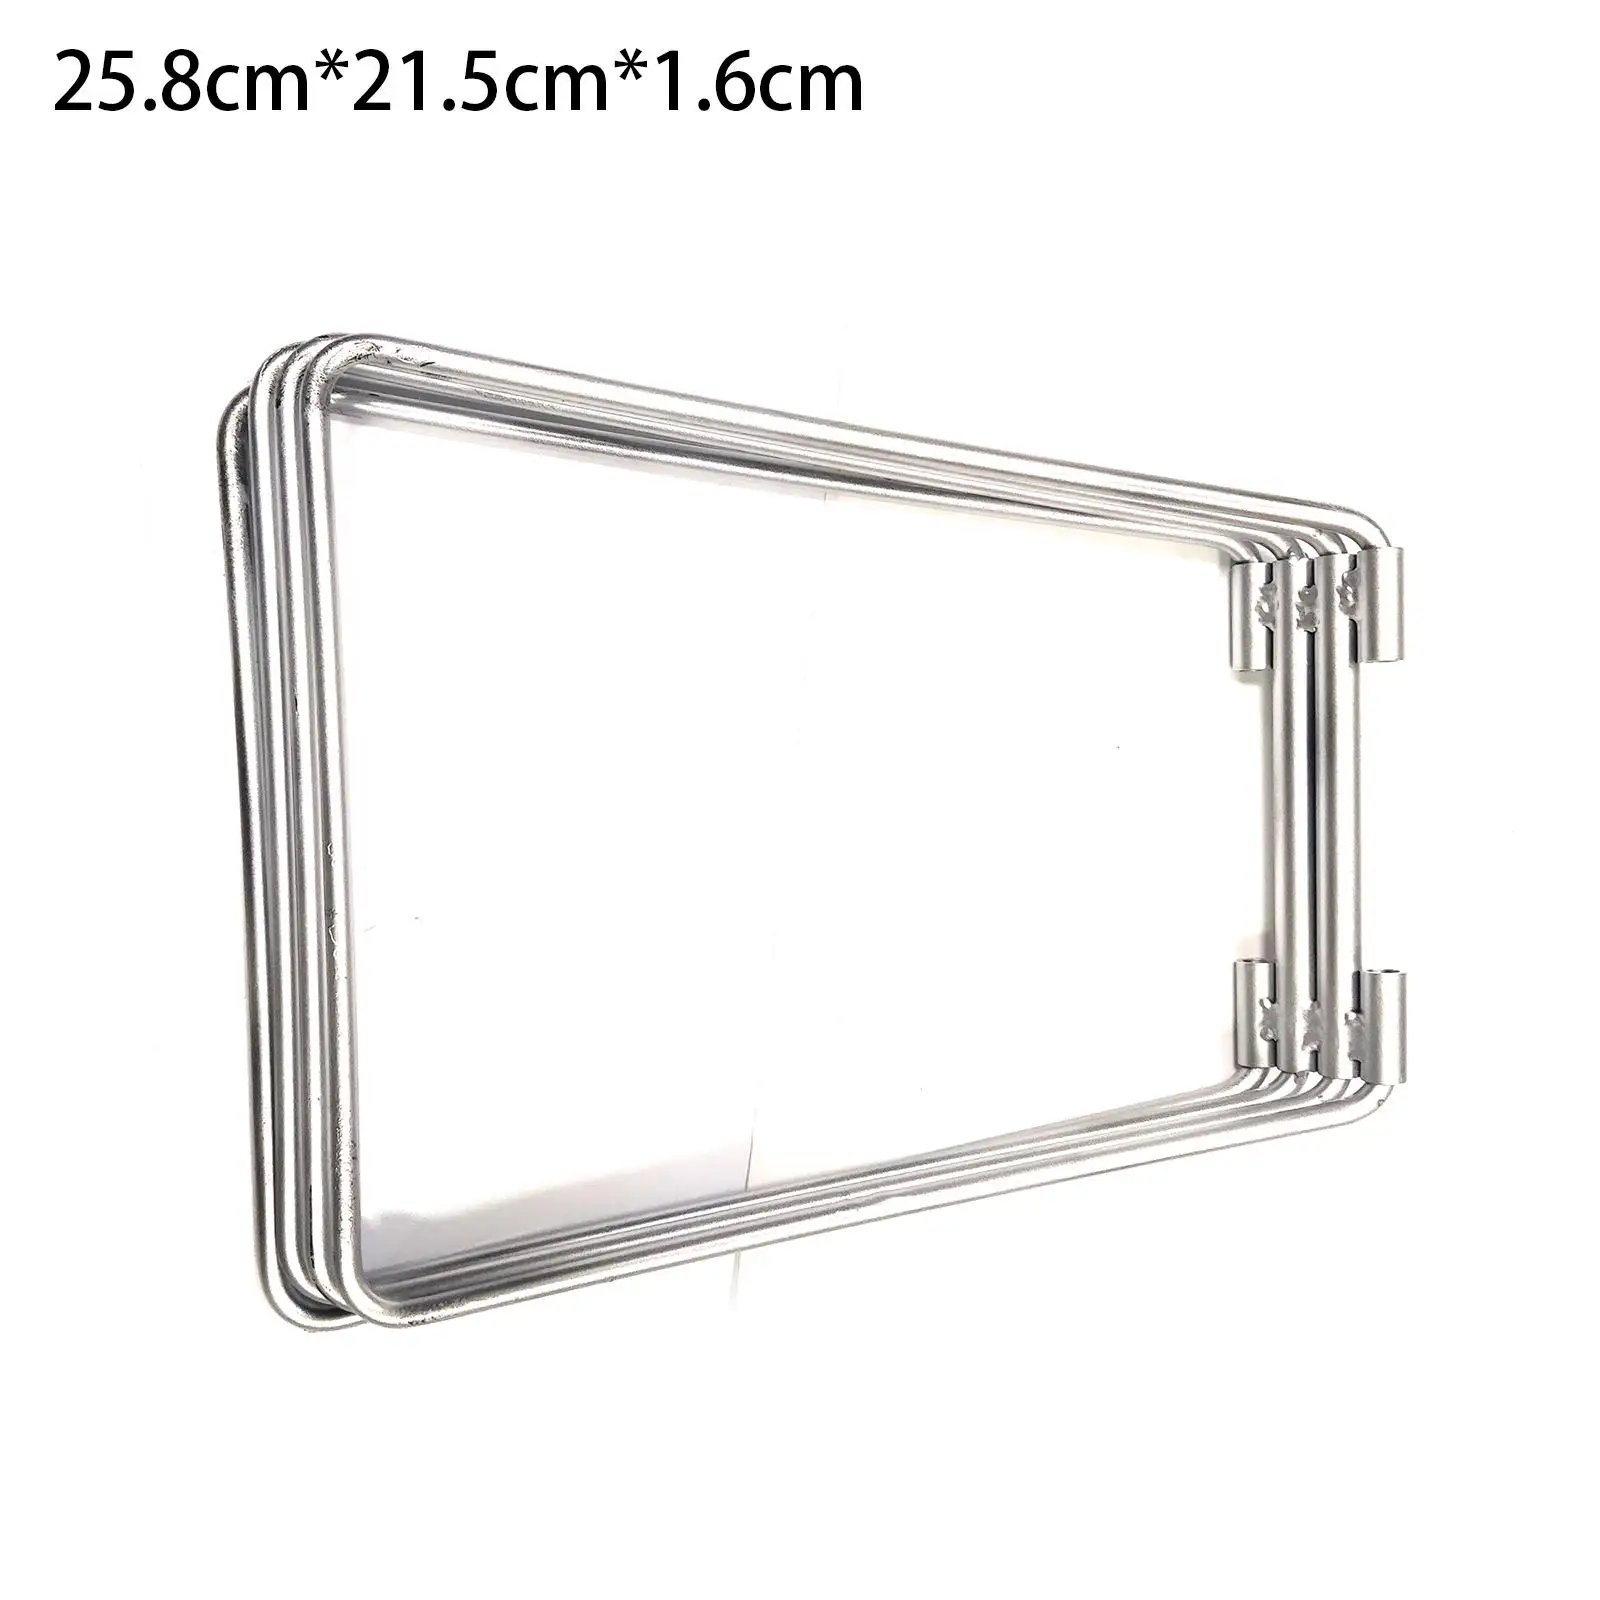 Foldable Cooler Stand Frame Heavy Duty Stable Metal Suitcase Stand Foldable Stand Rack for Travel, BBQ, Hiking, Fishing